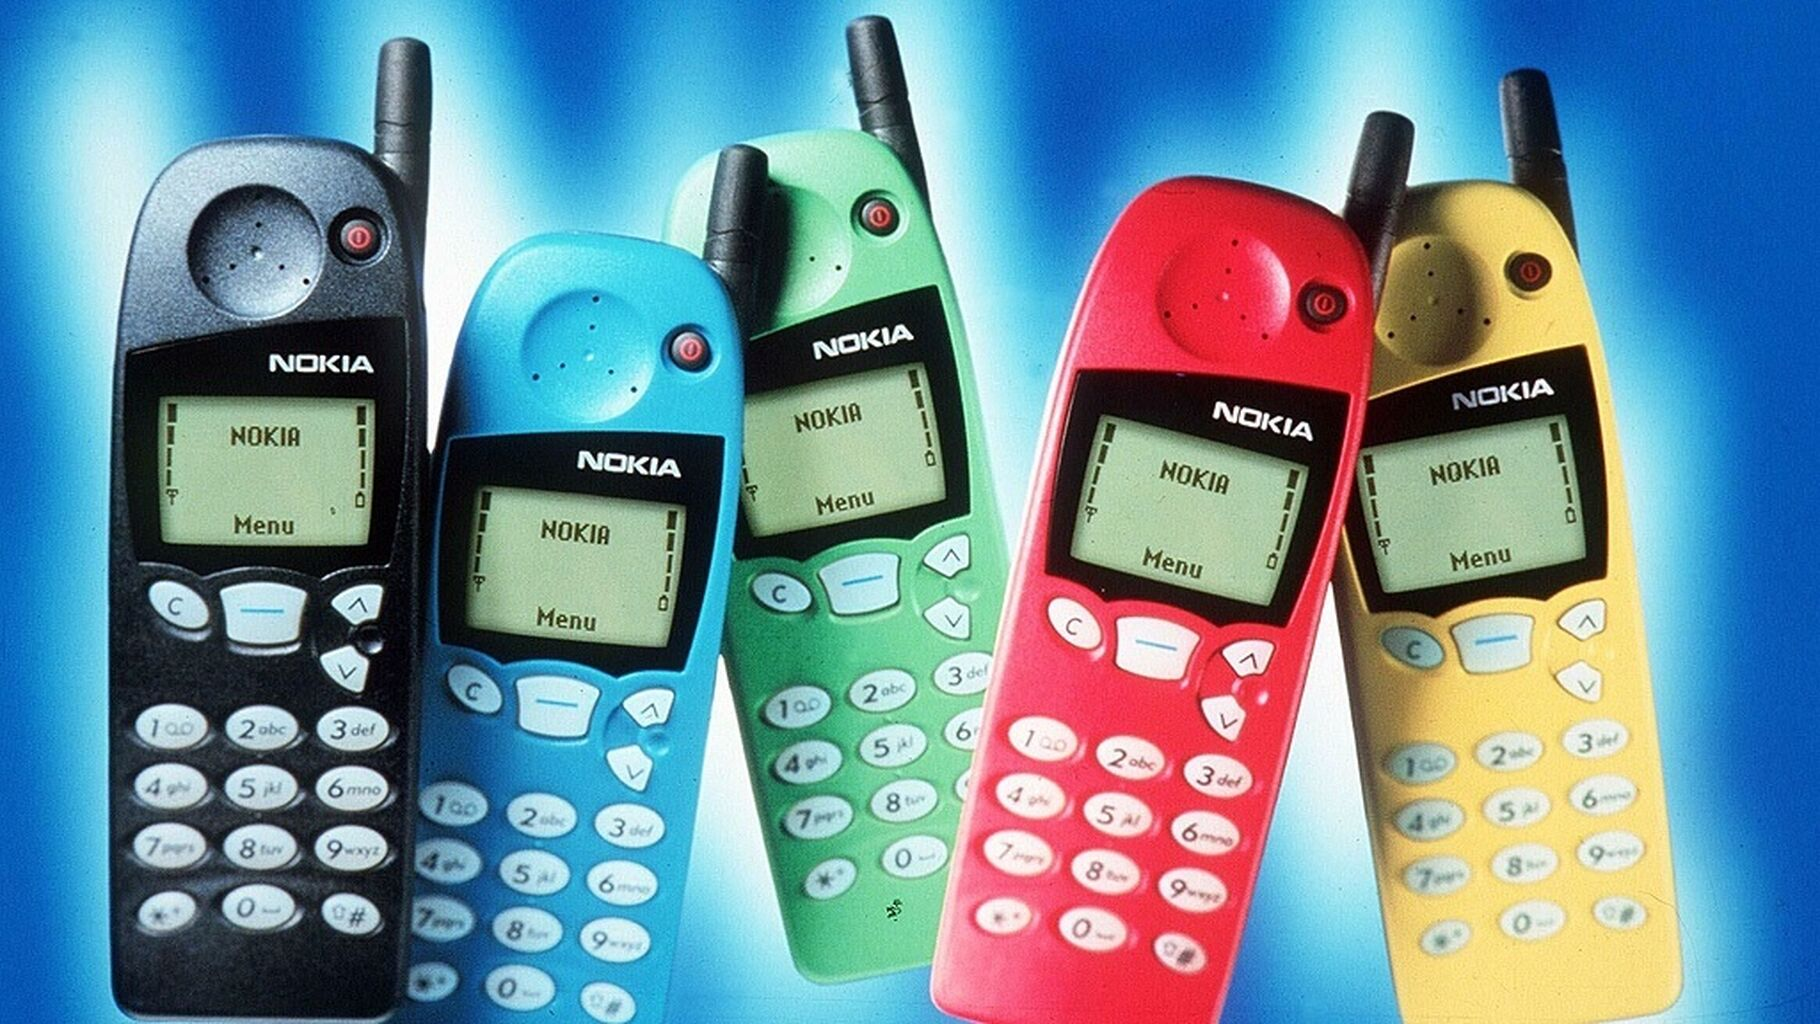 Nokia 5110 - Back from the dead. Part 1: Nostalgia